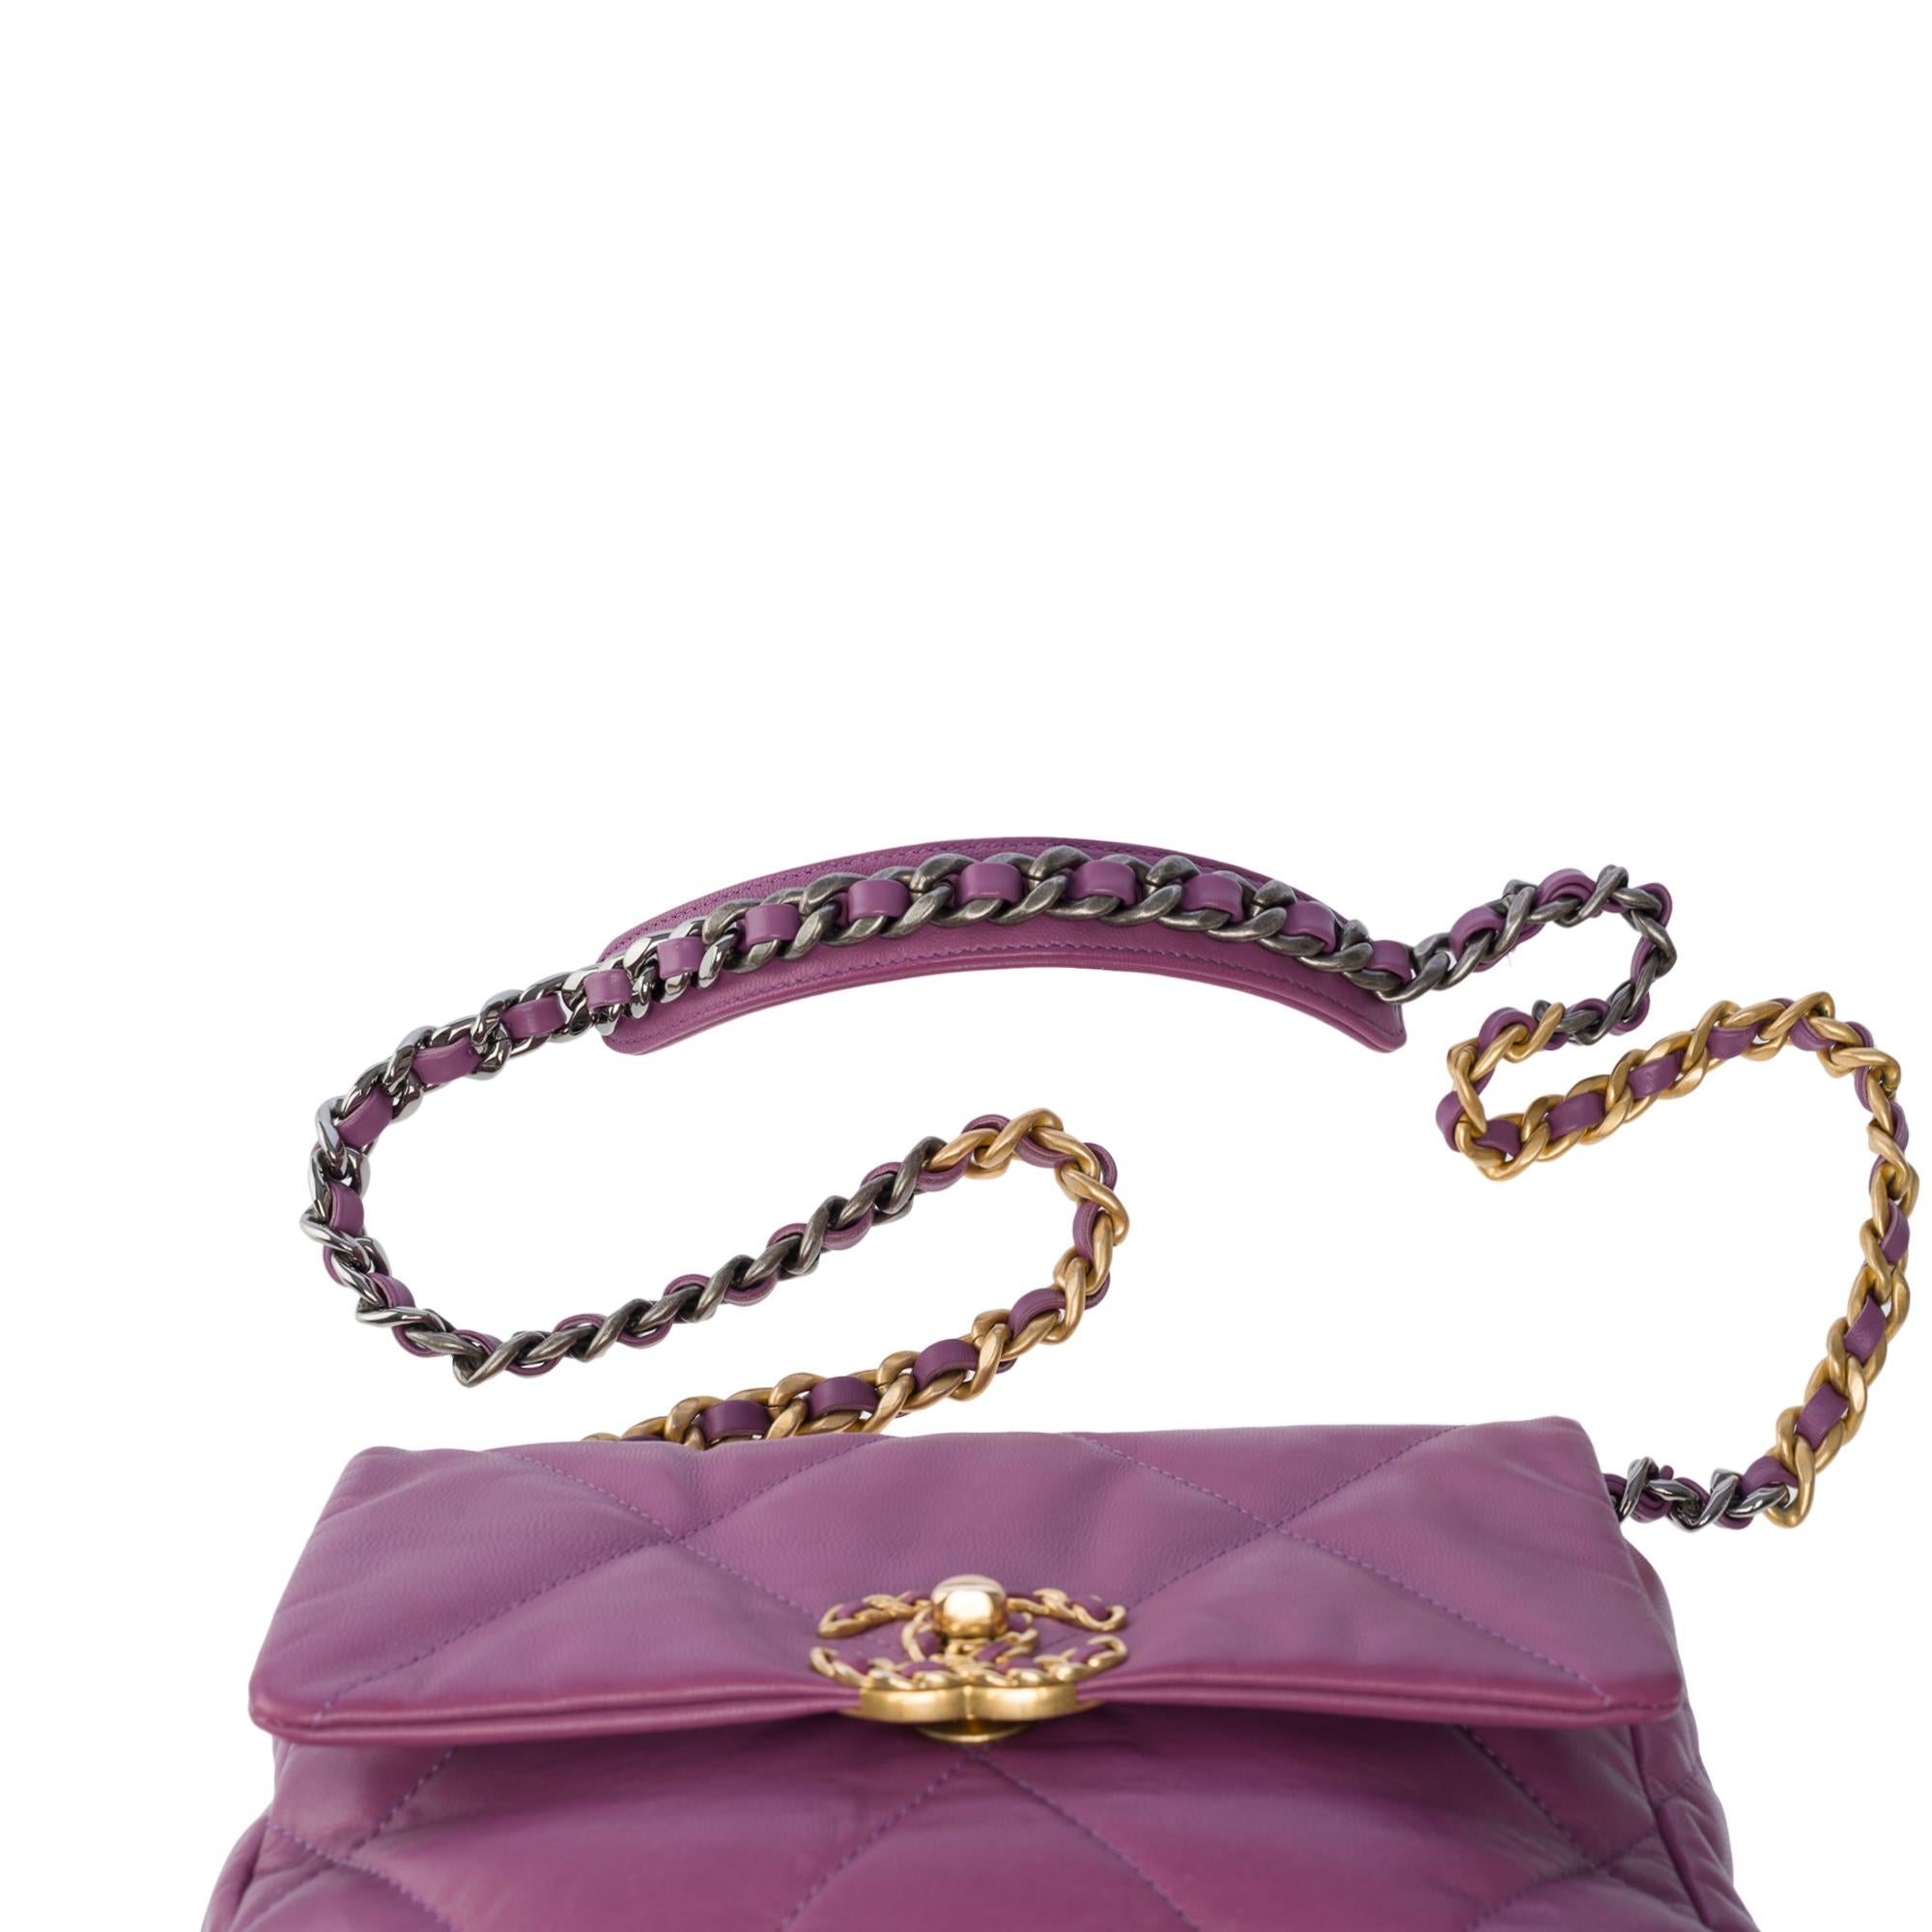 Stunning Chanel 19 shoulder bag in purple quilted leather , Matt gold and SHW For Sale 6